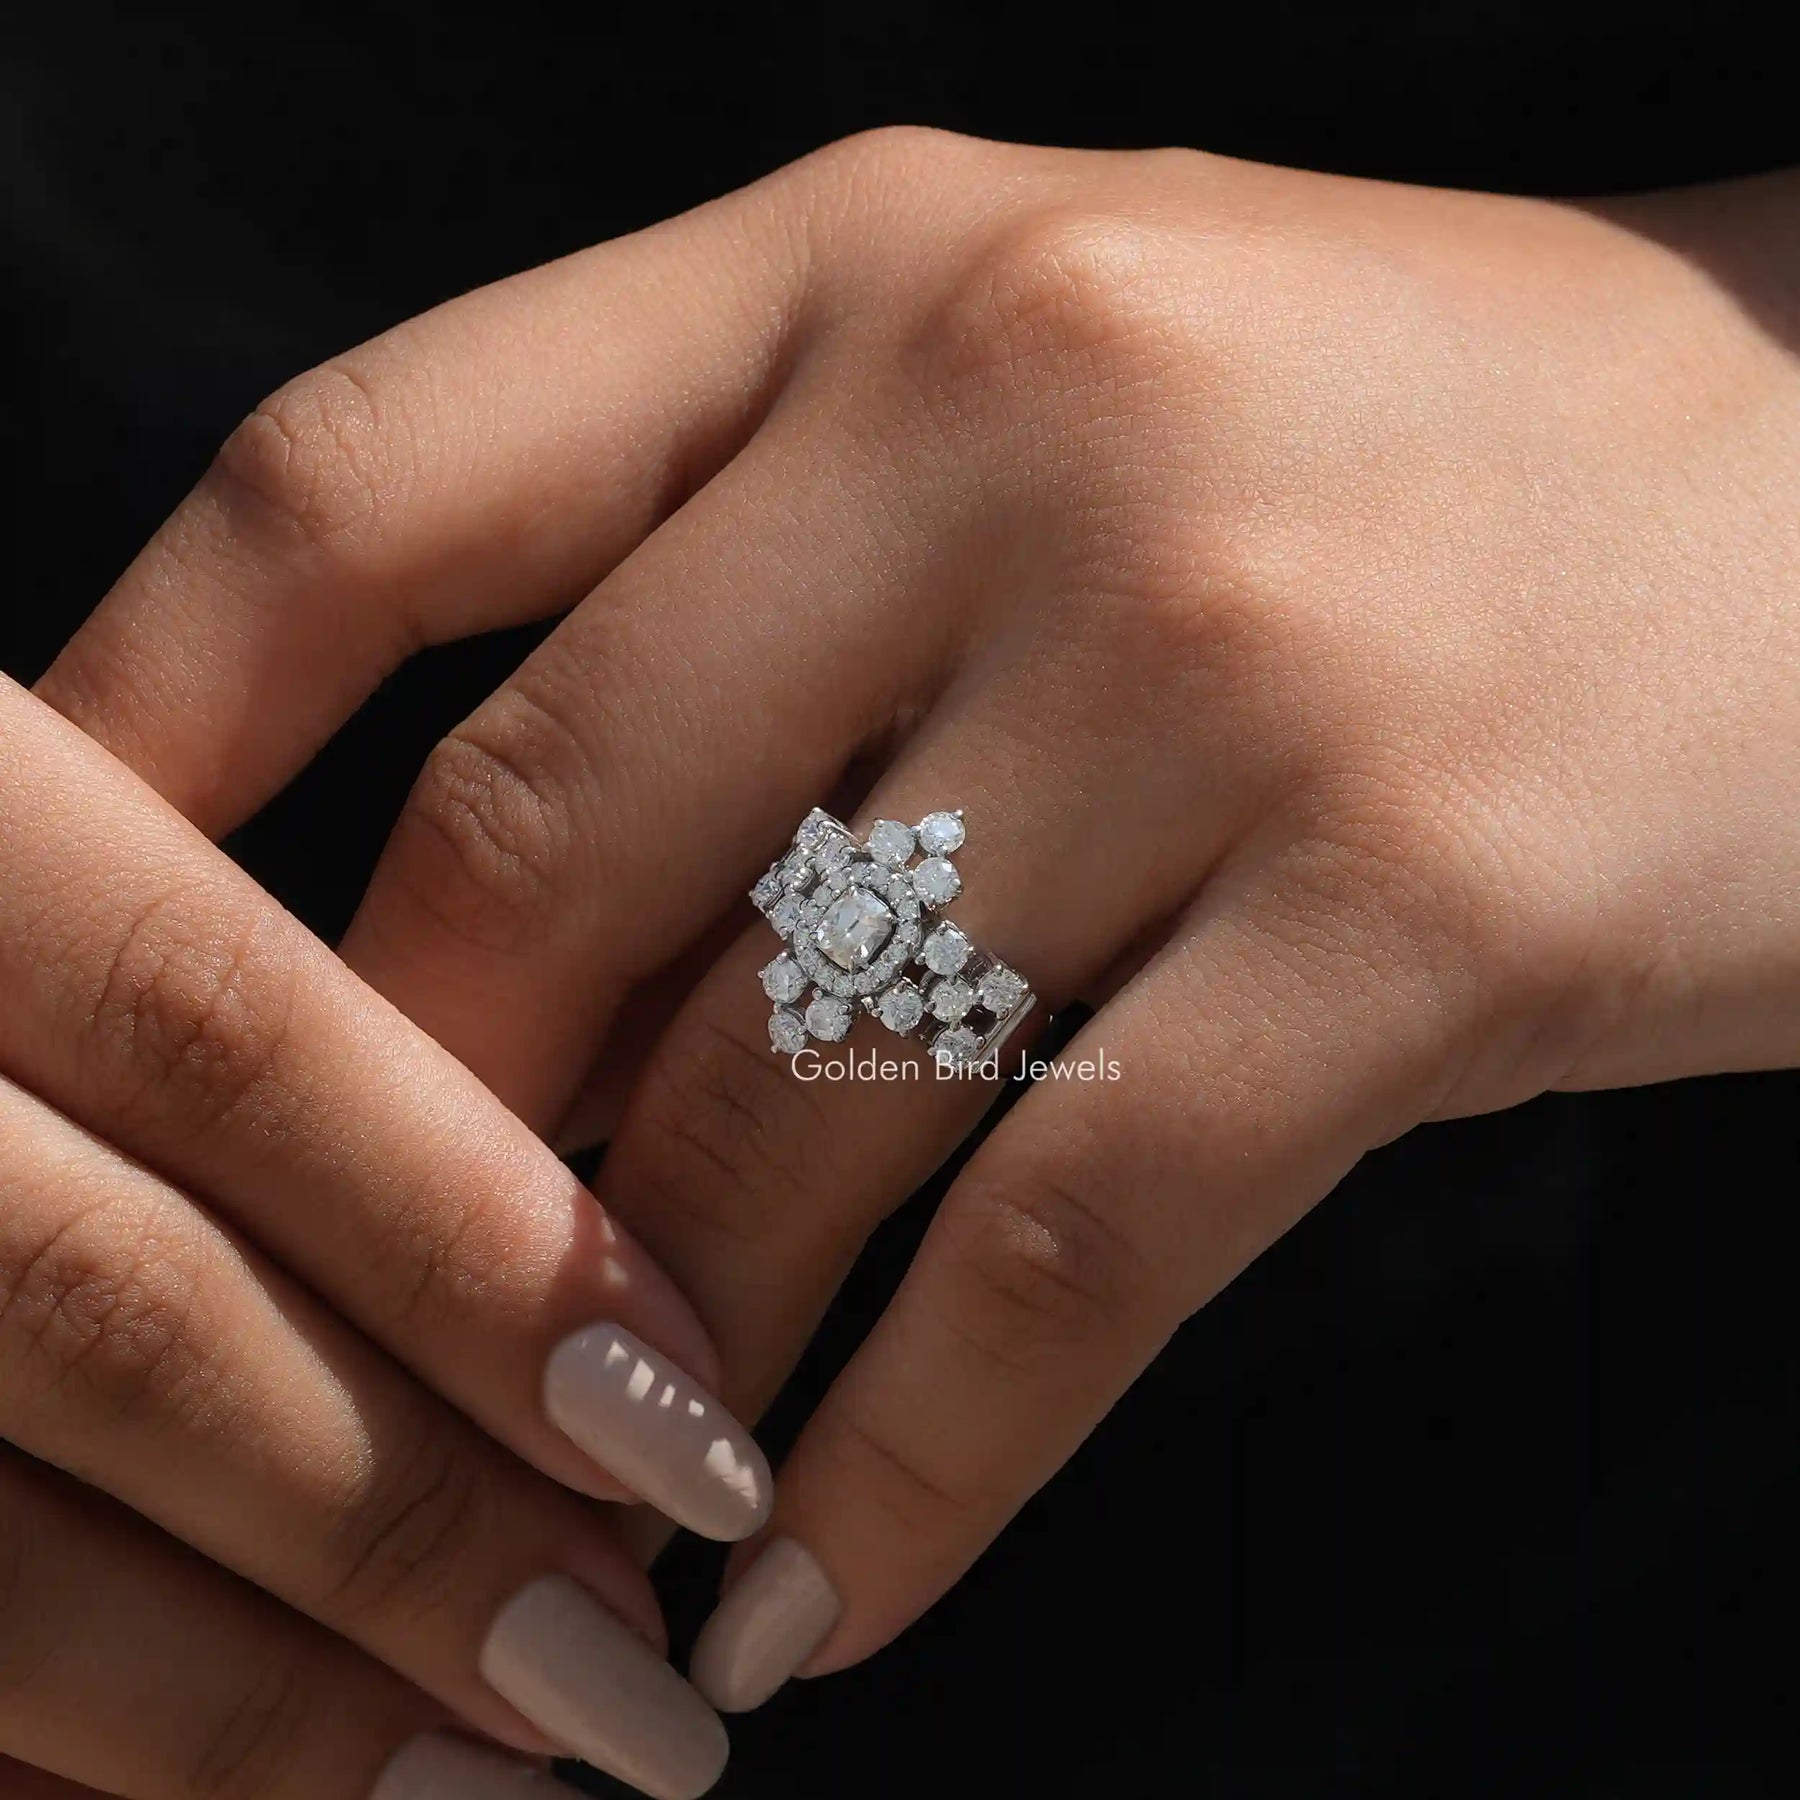 [In finger front view of cushion cut vintage style ring]-[Golden Bird Jewels]